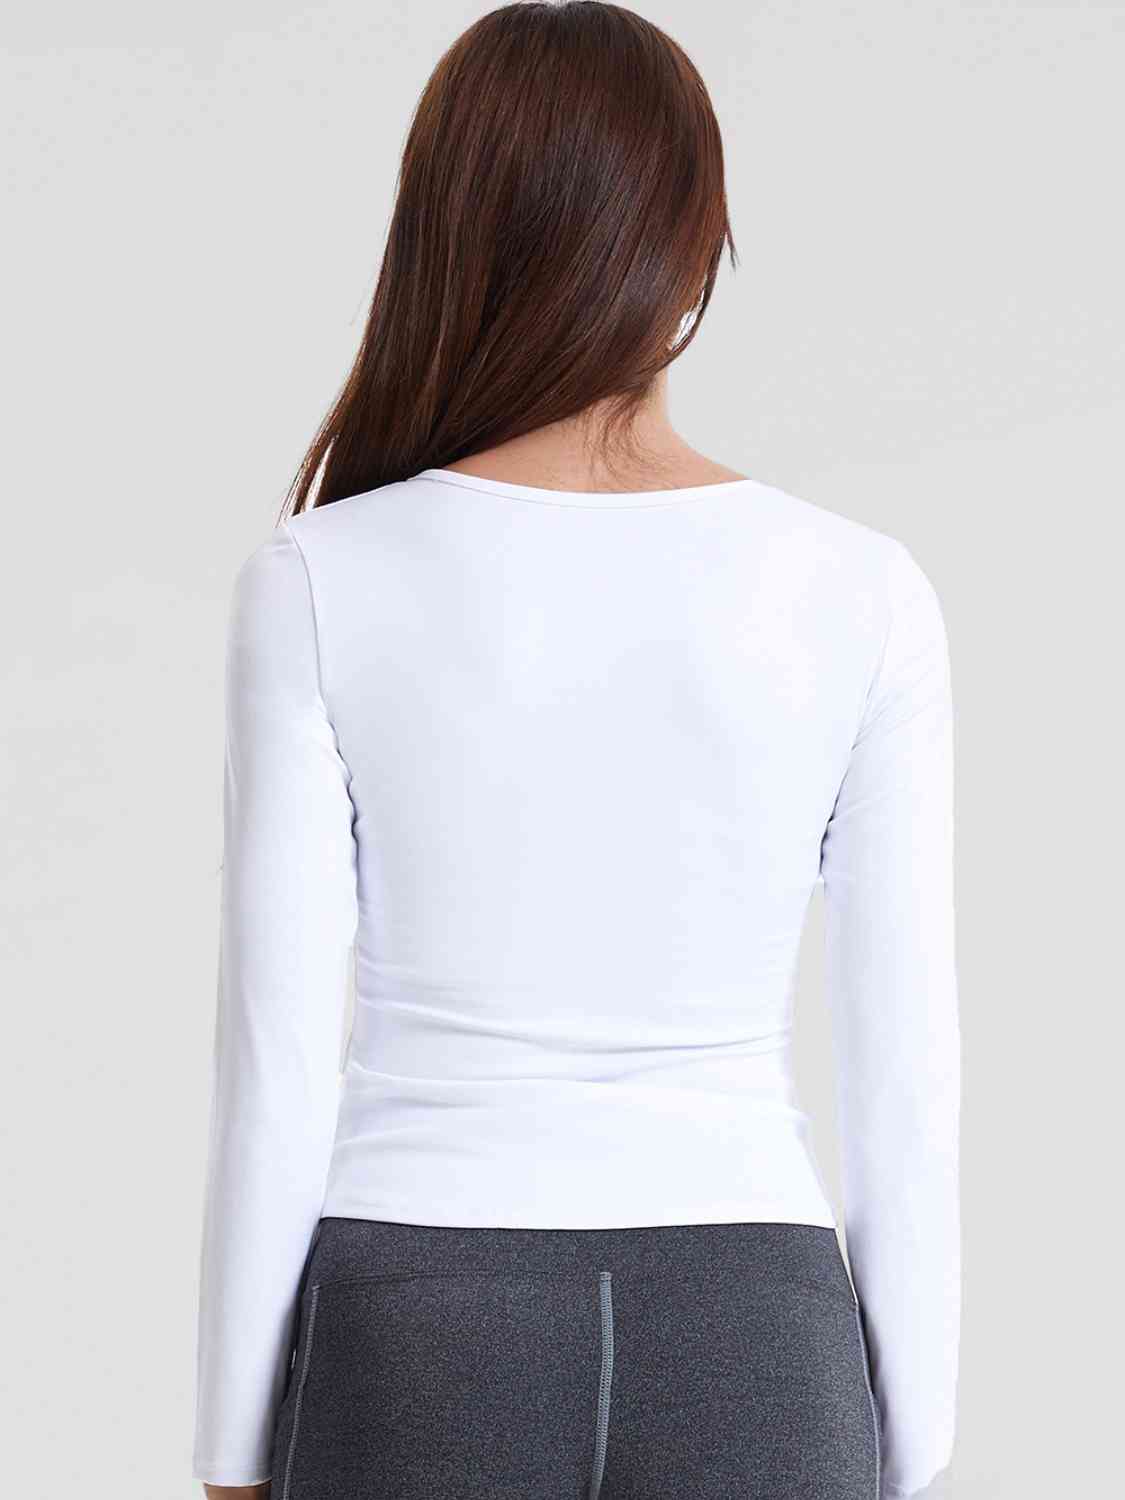 Notched Neck Ruched Sports Top